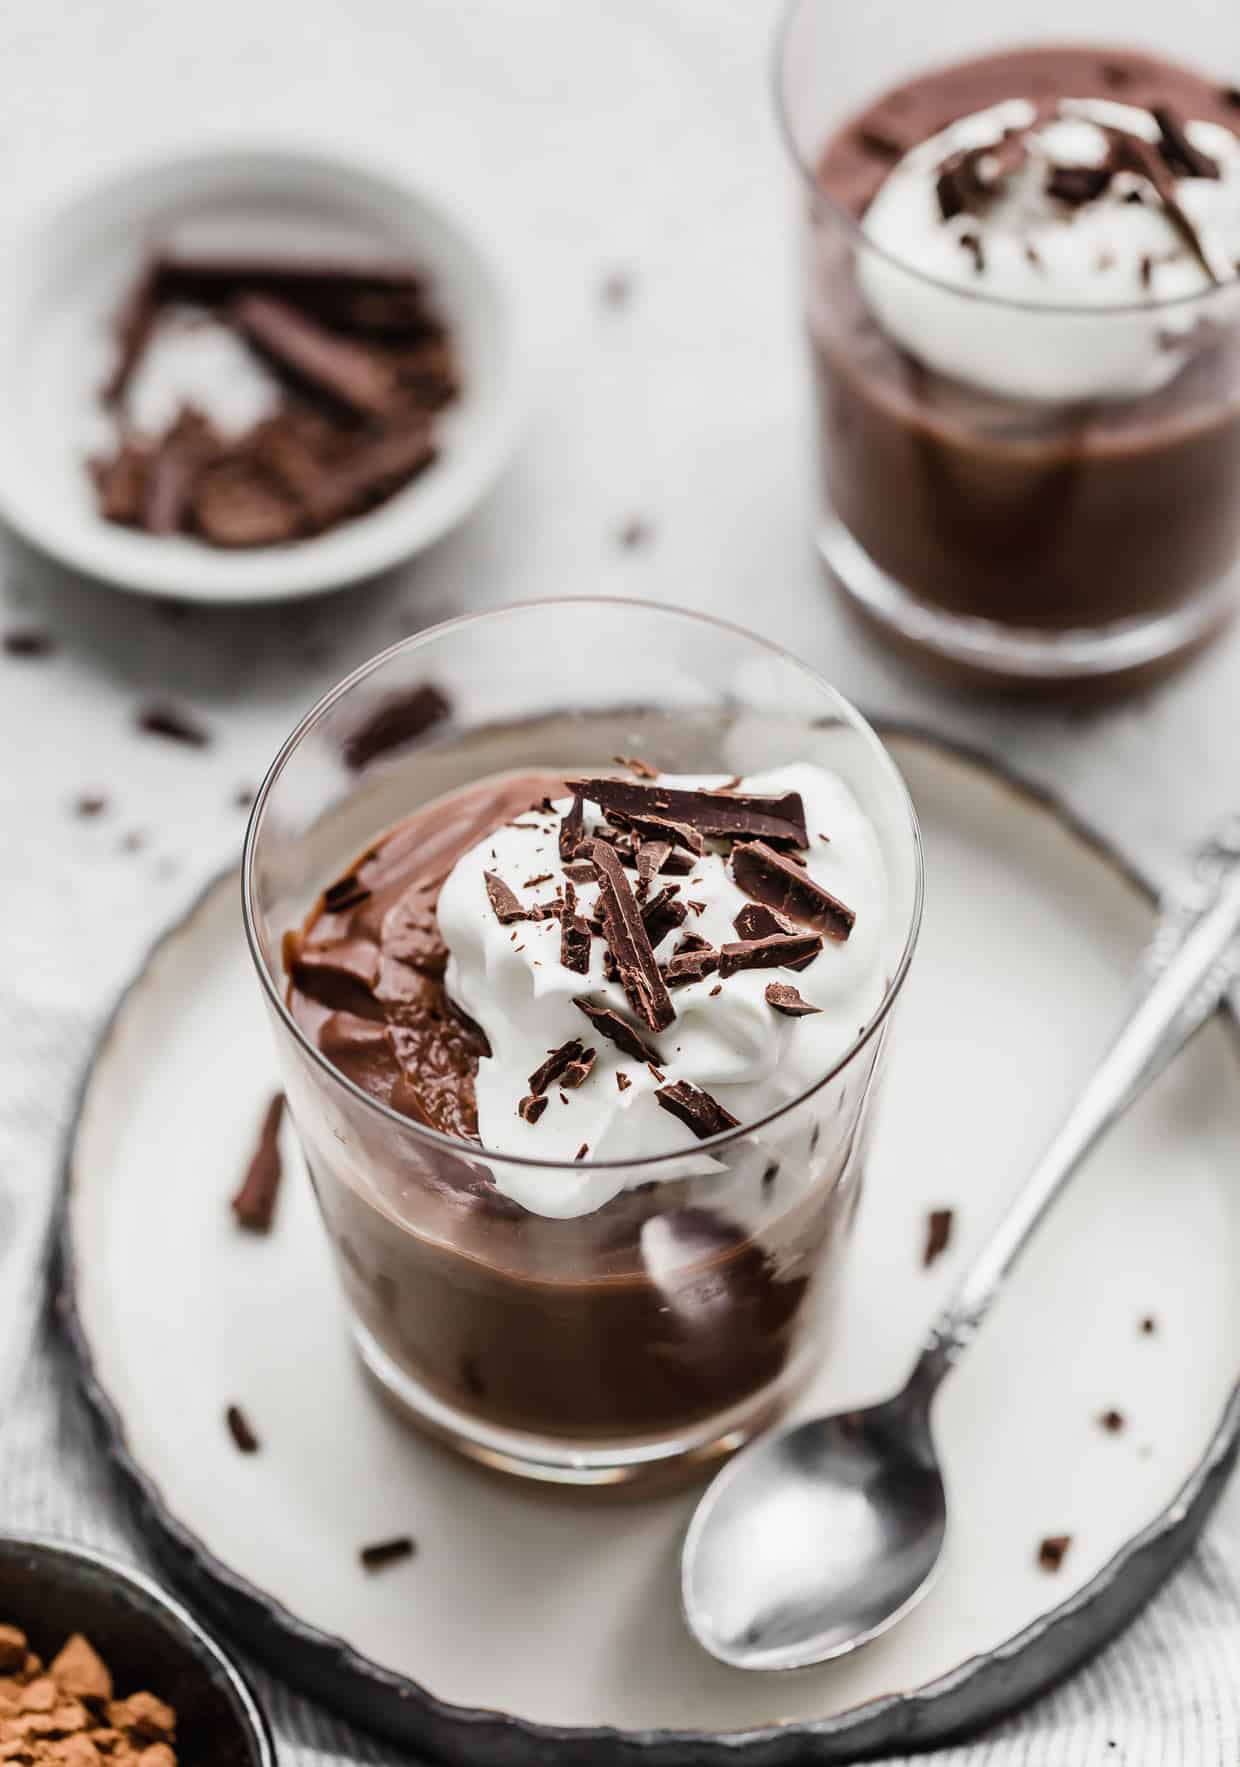 Homemade Chocolate Pudding in a glass cup on a white plate with a spoon on the plate.